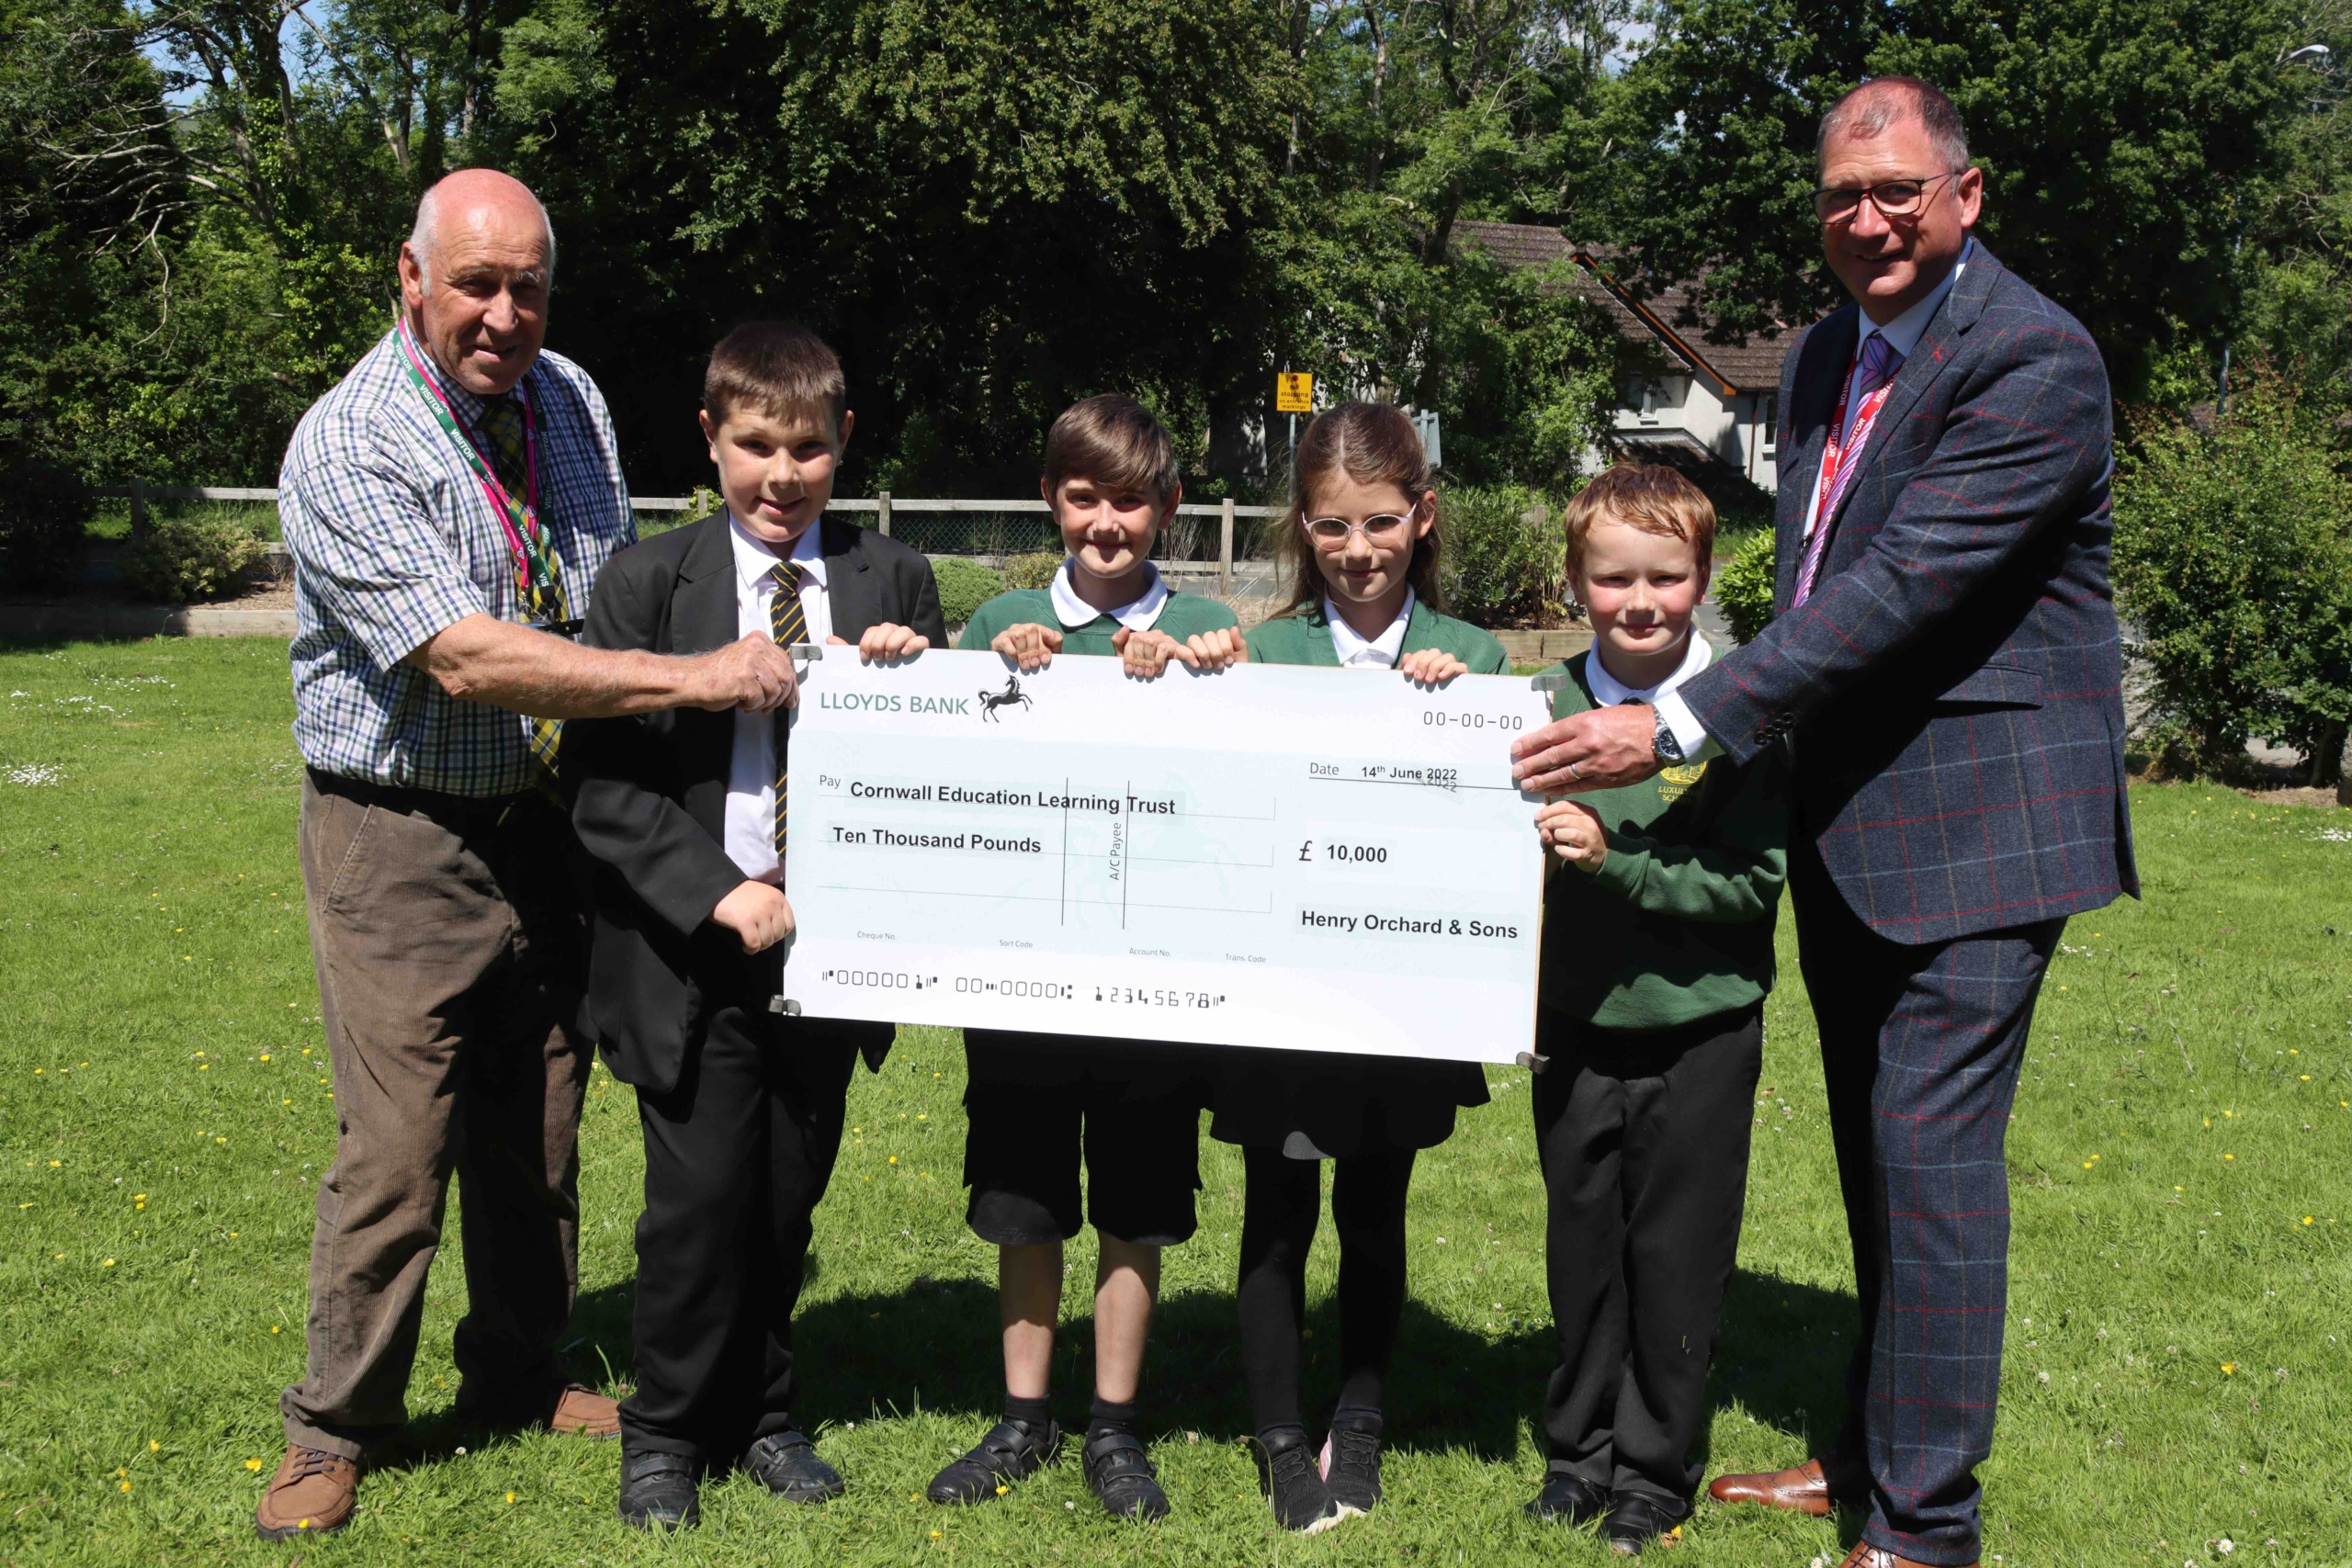 Cheque presentation featuring L-R: Geoff Brown (Chair of Trust Board at Cornwall Education Learning Trust), Finlay (Penrice Academy), Oliver + Flora + Ewan (Luxulyan School), Henry Orchard.